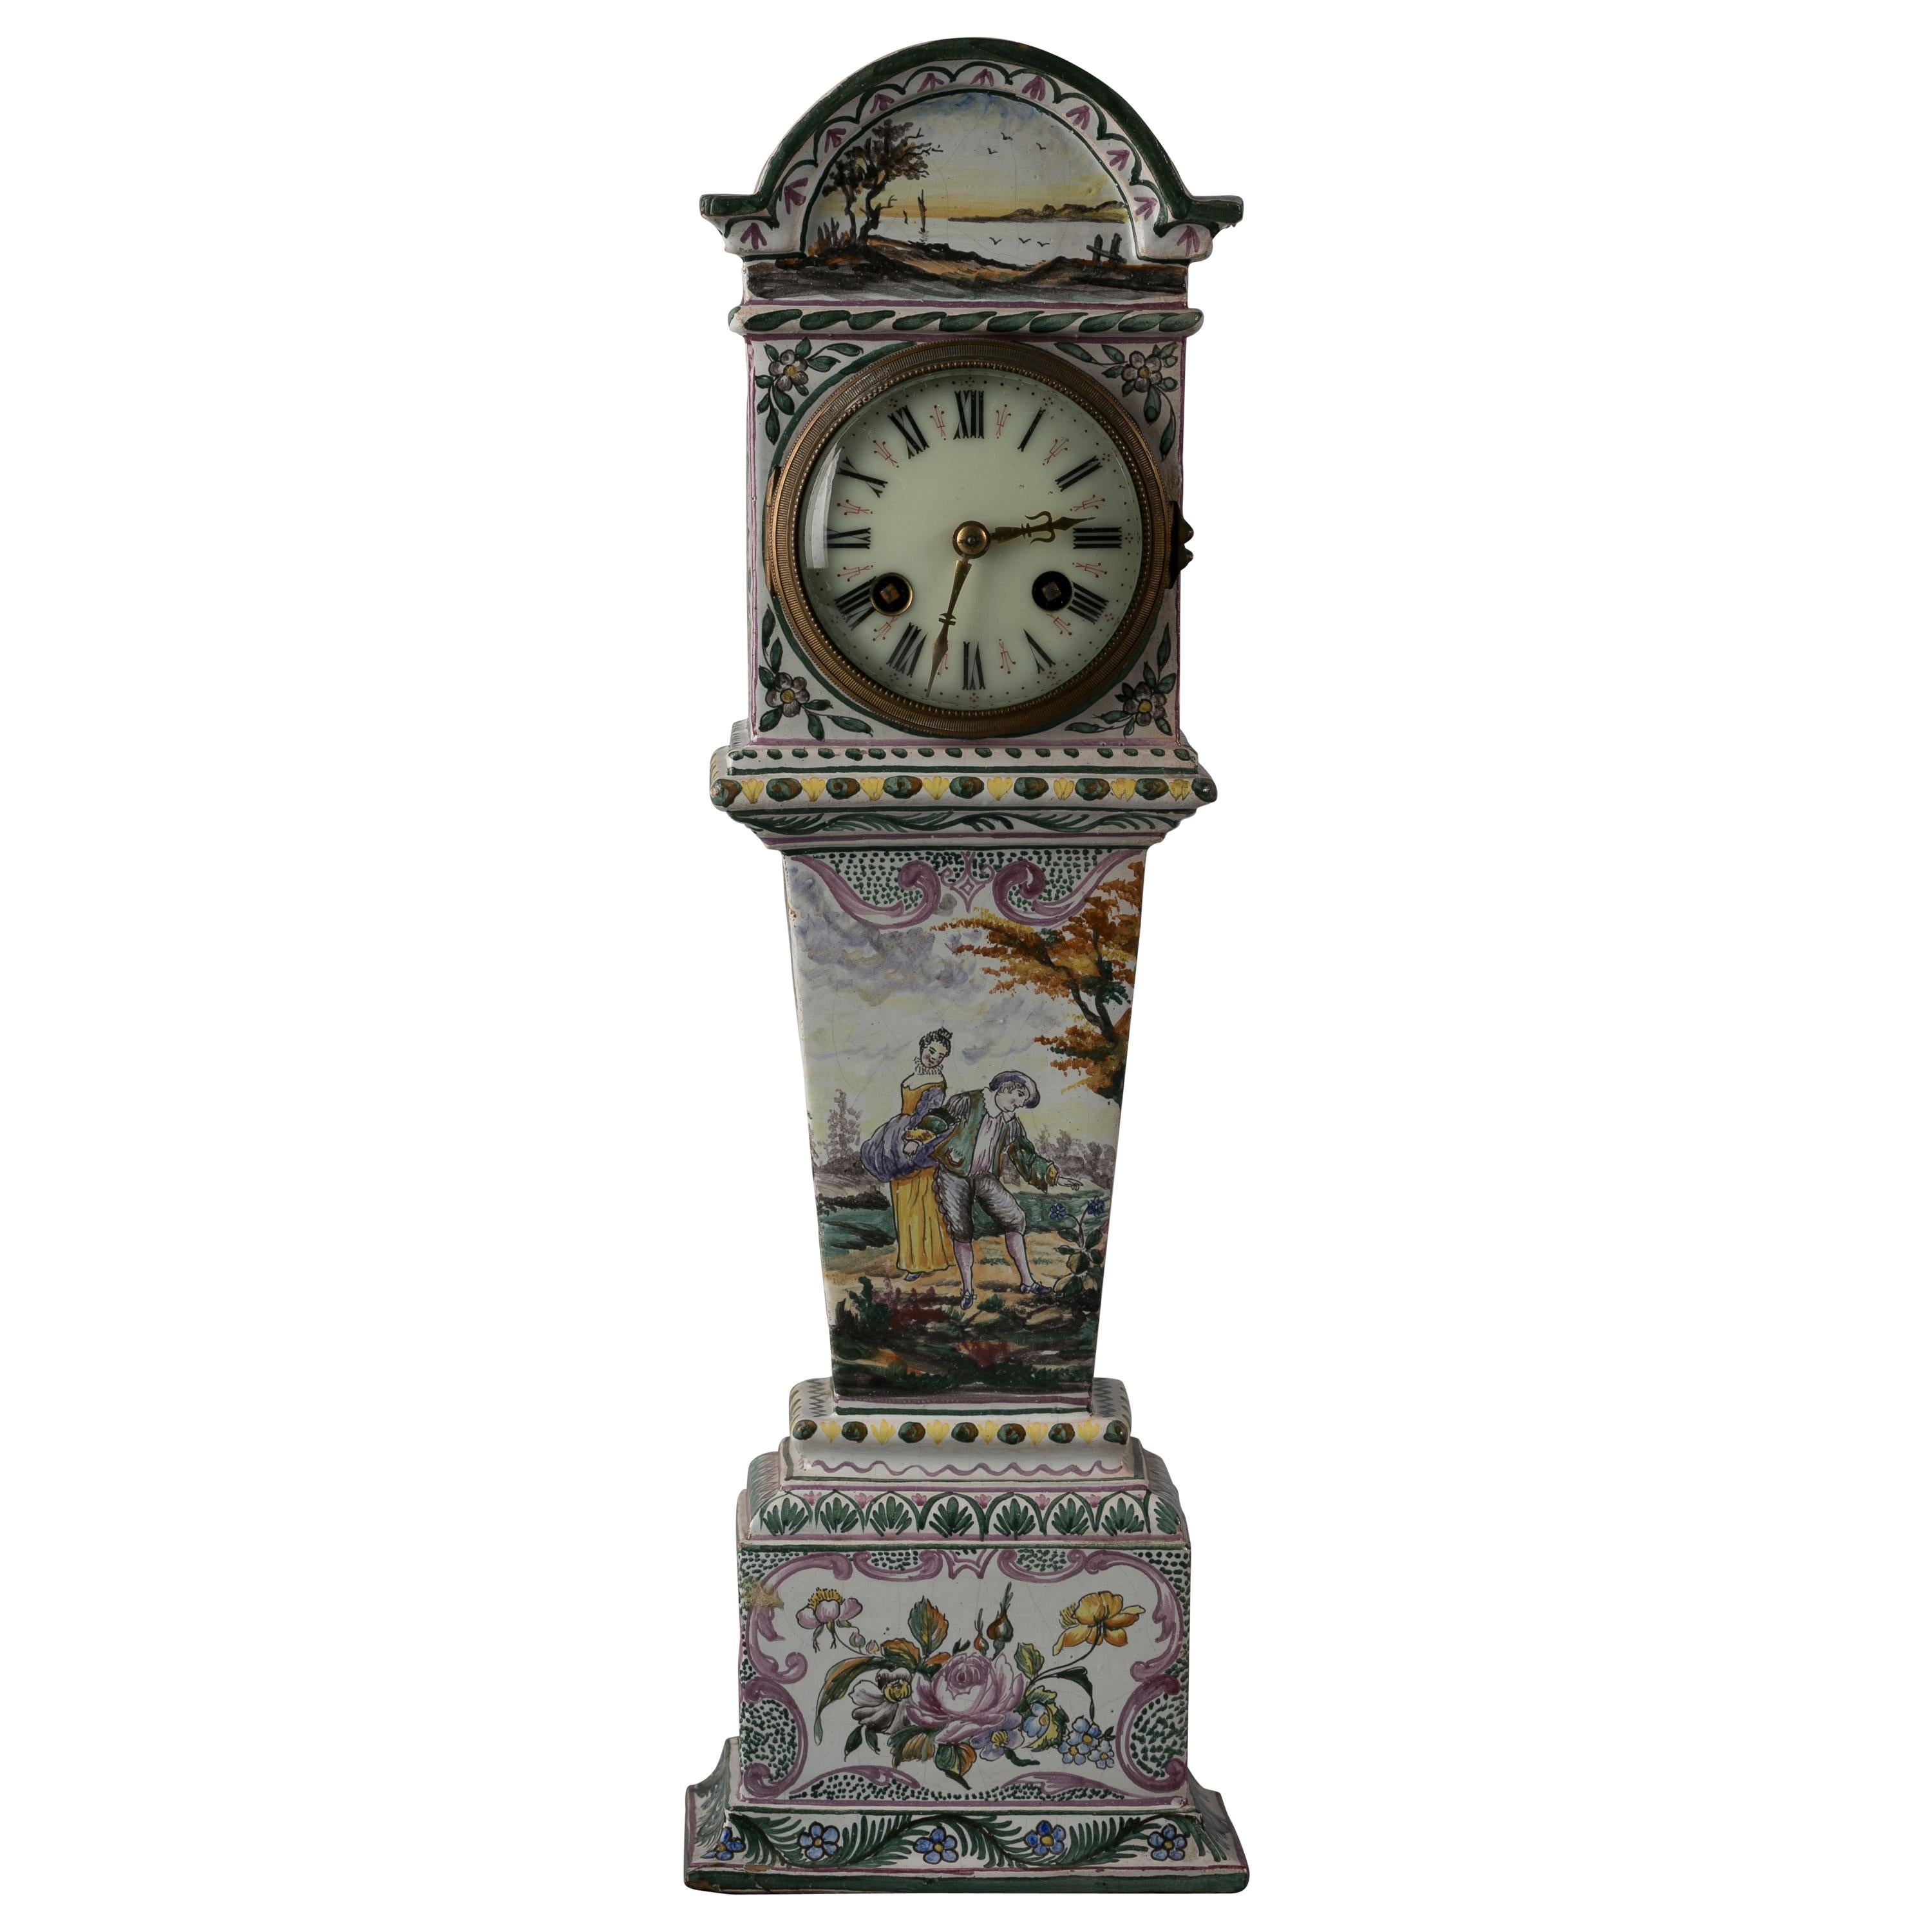 French Faience "Grandfather Clock", circa 1875